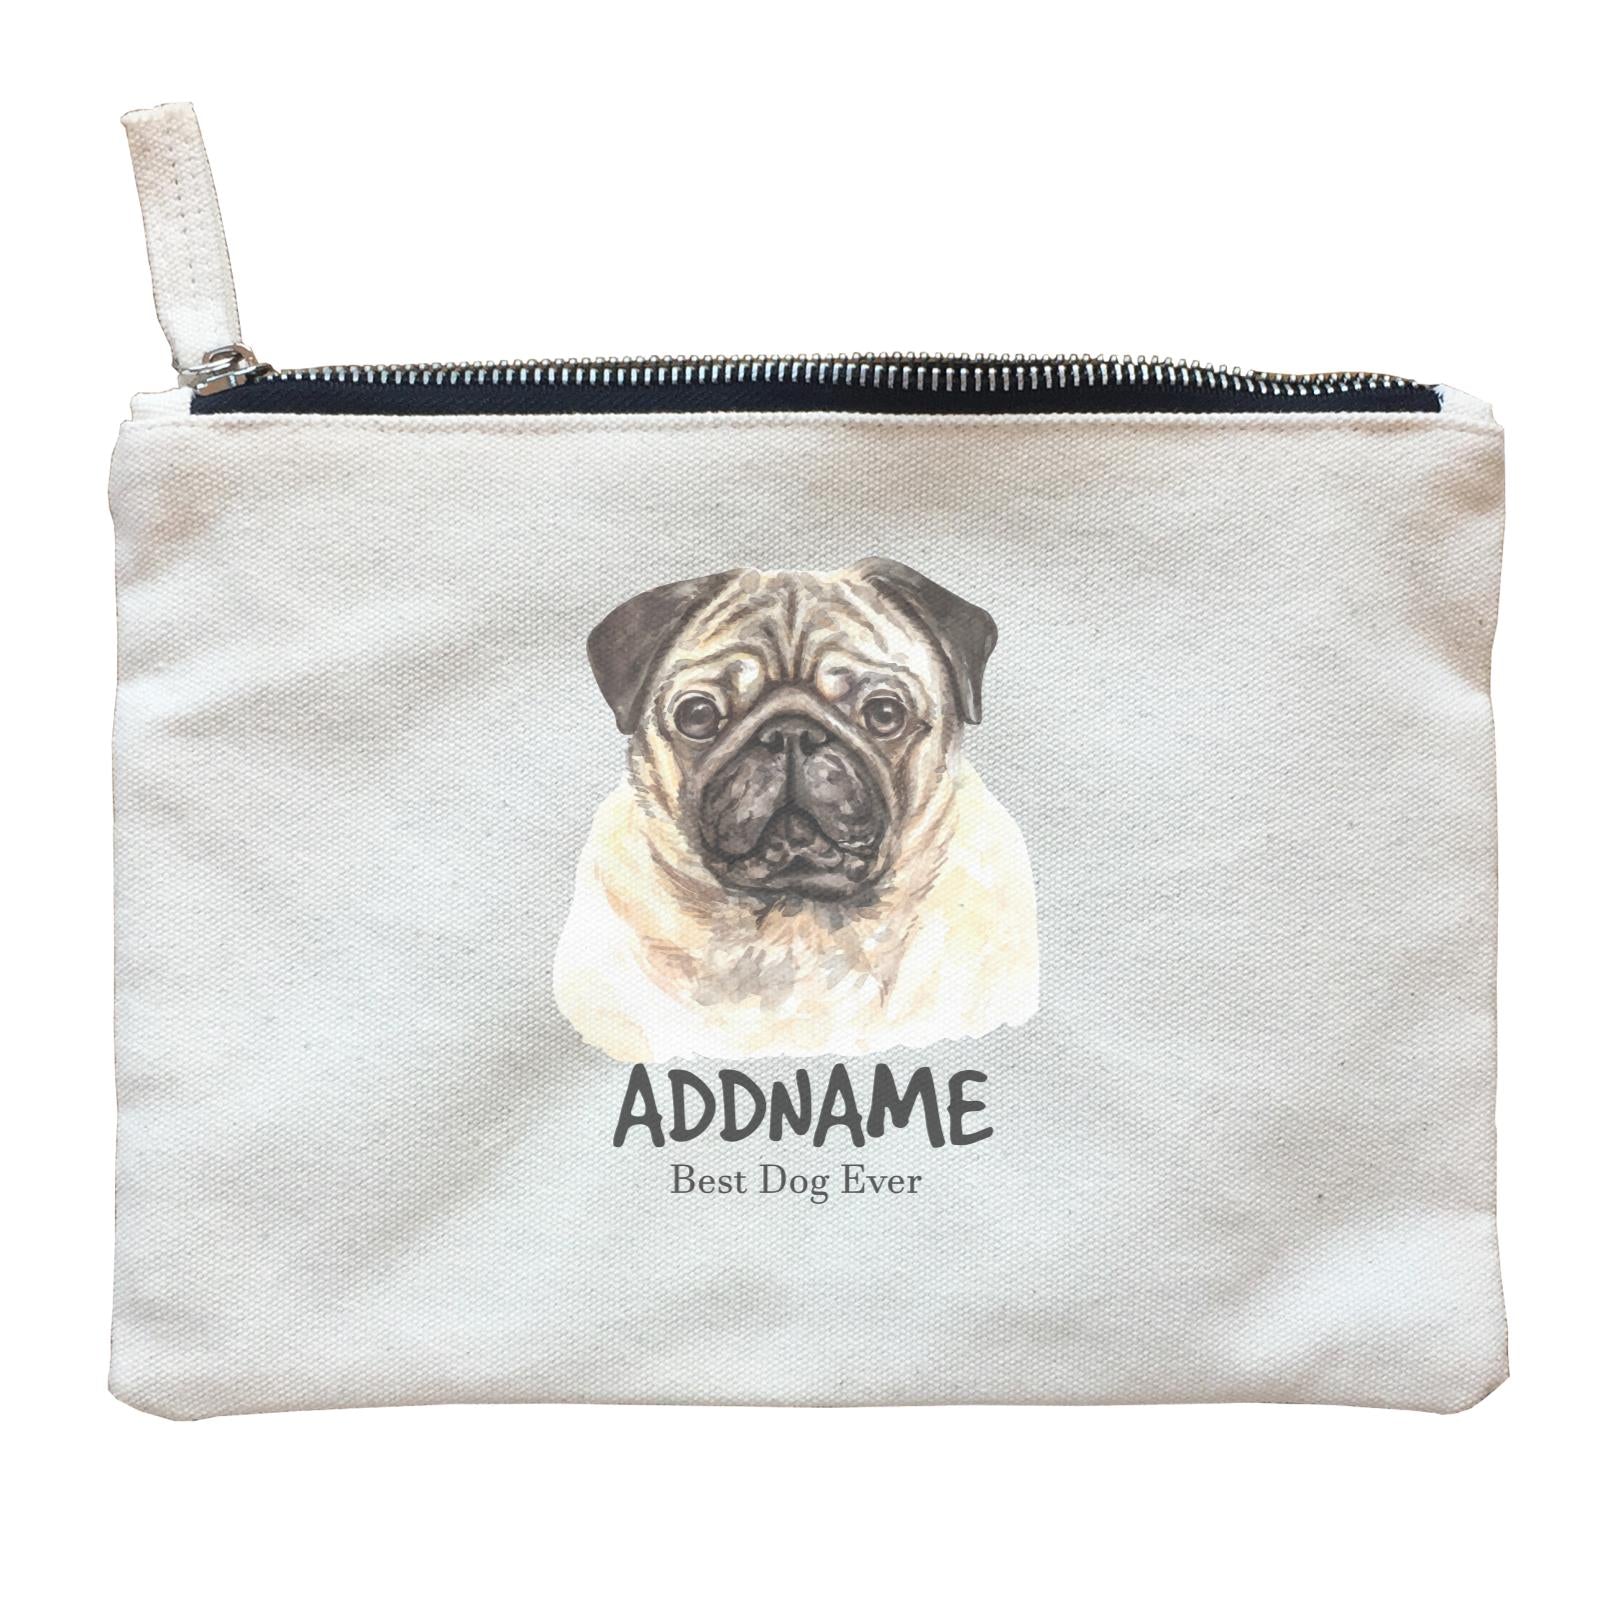 Watercolor Dog Pug Dog Best Dog Ever Addname Zipper Pouch